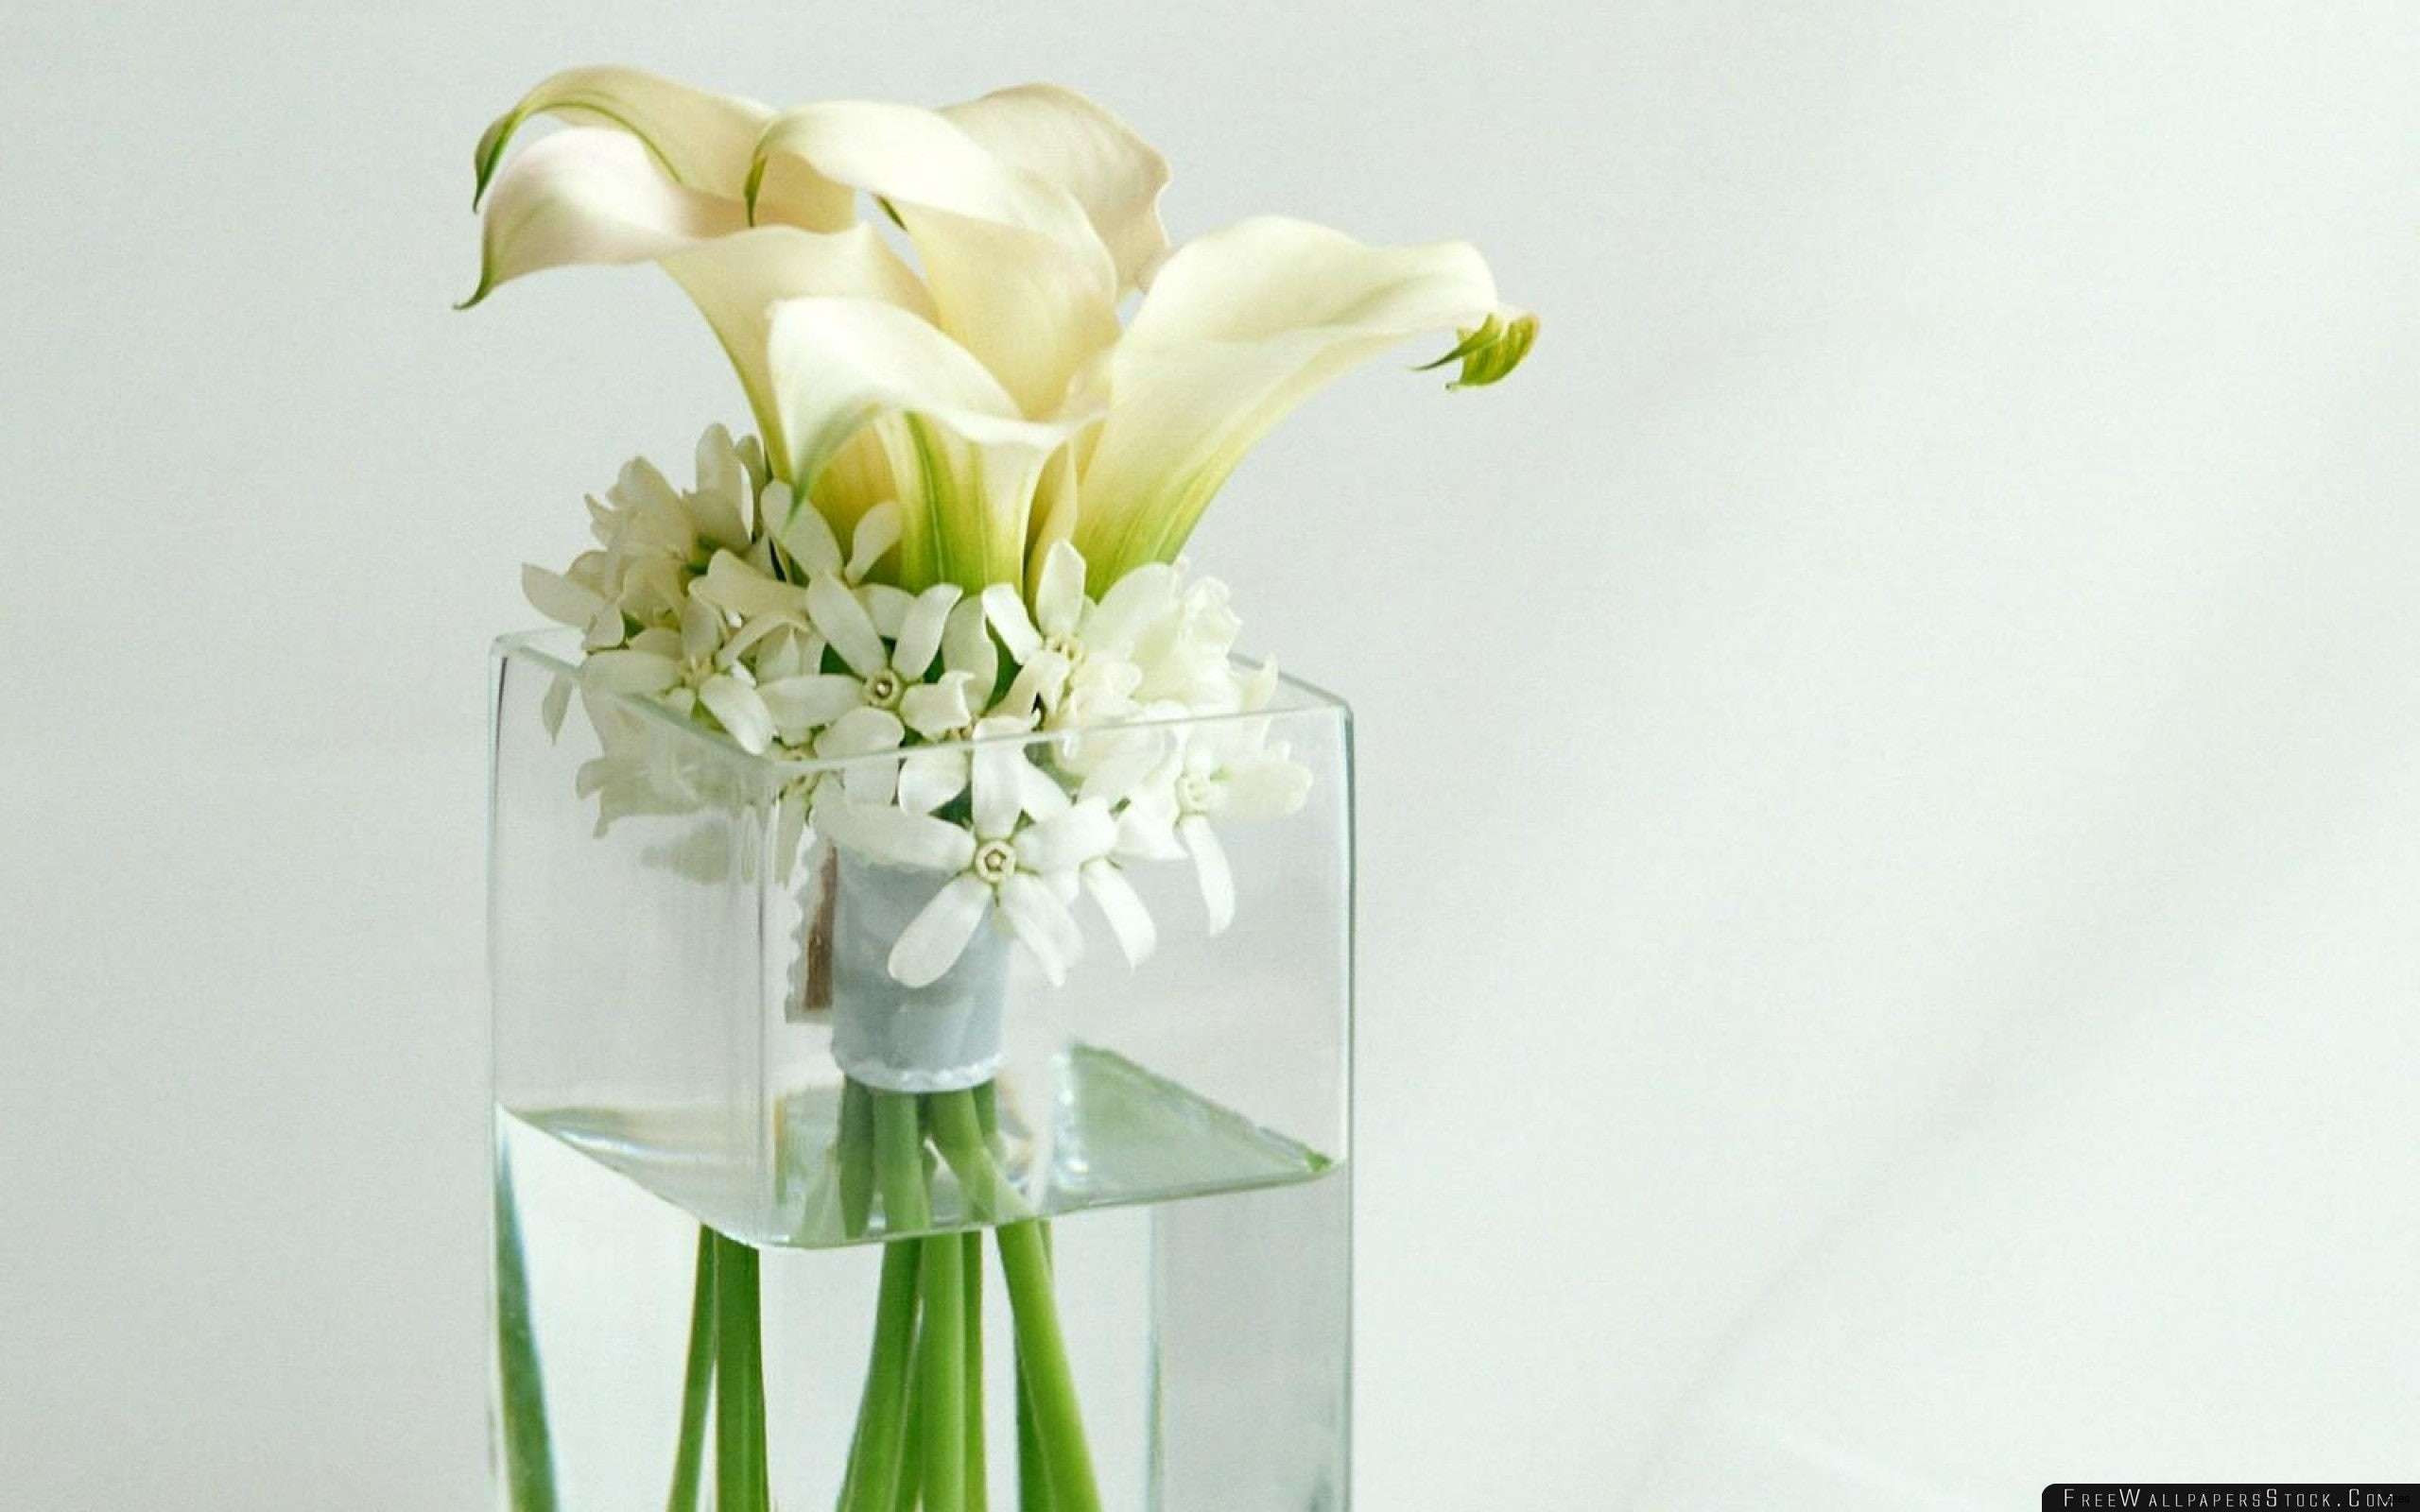 10 Best Small Artificial Flowers In Vase 2024 free download small artificial flowers in vase of tiny glass vases image tall vase centerpiece ideas vases flowers in within tall vase centerpiece ideas vases flowers in water 0d artificial small